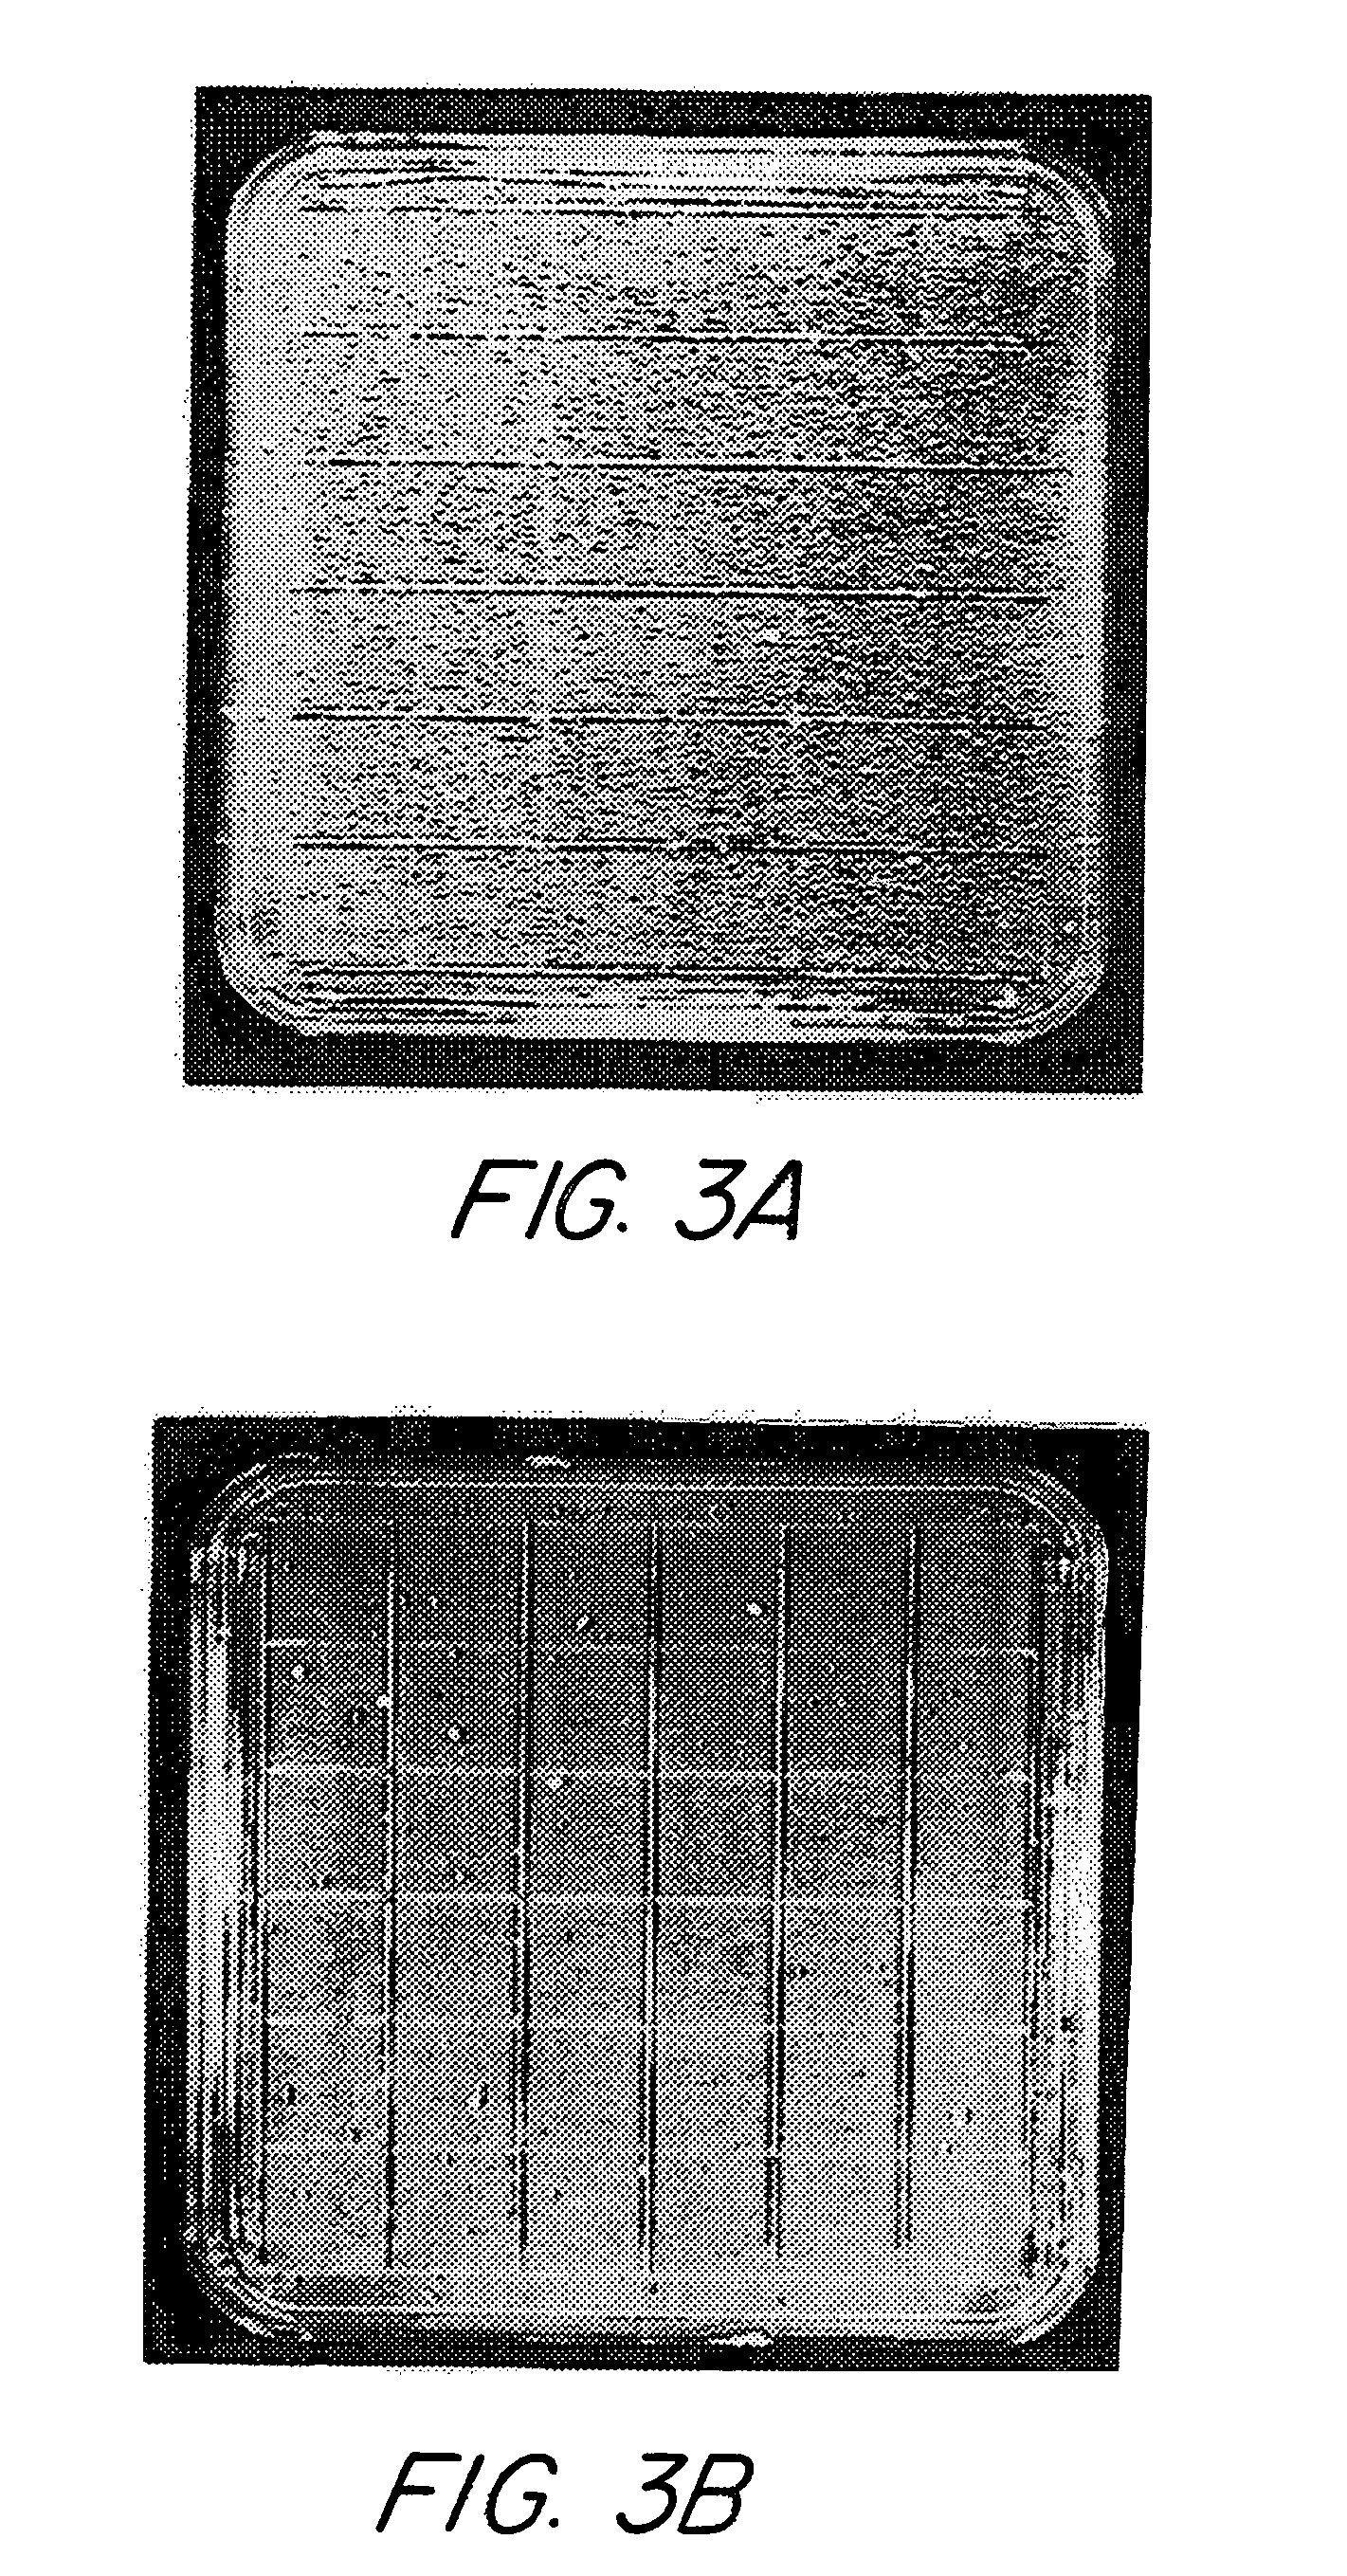 Method for improving the function of heterologous G protein-coupled receptors